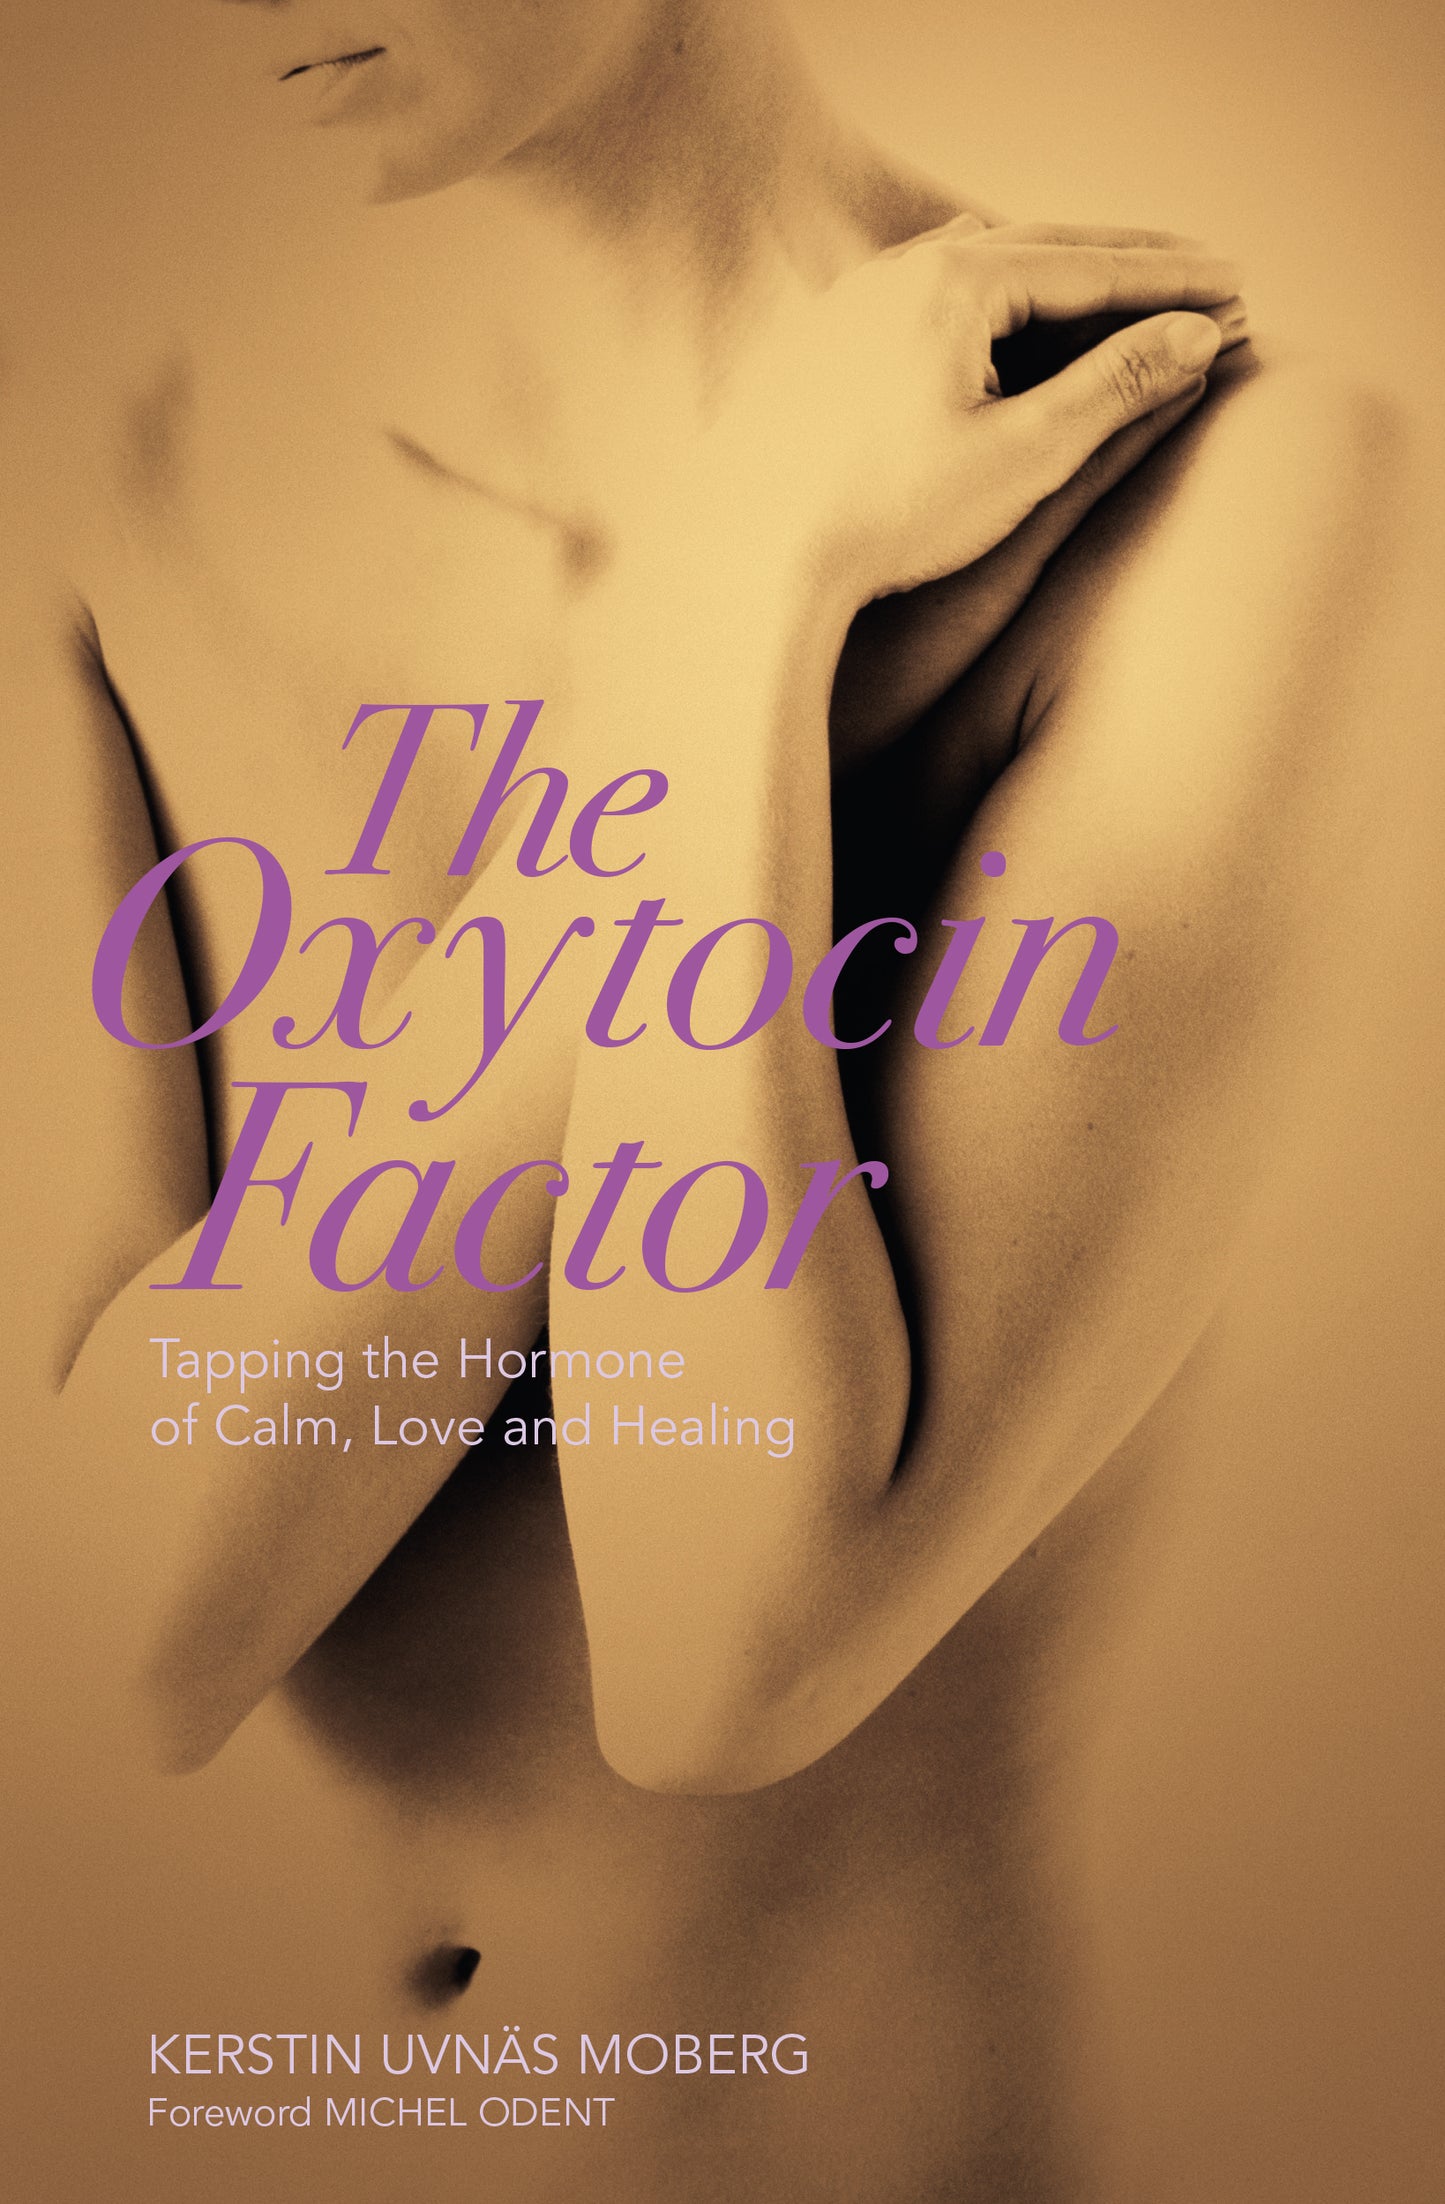 The Oxytocin Factor: Tapping the Hormone of Calm, Love and Healing